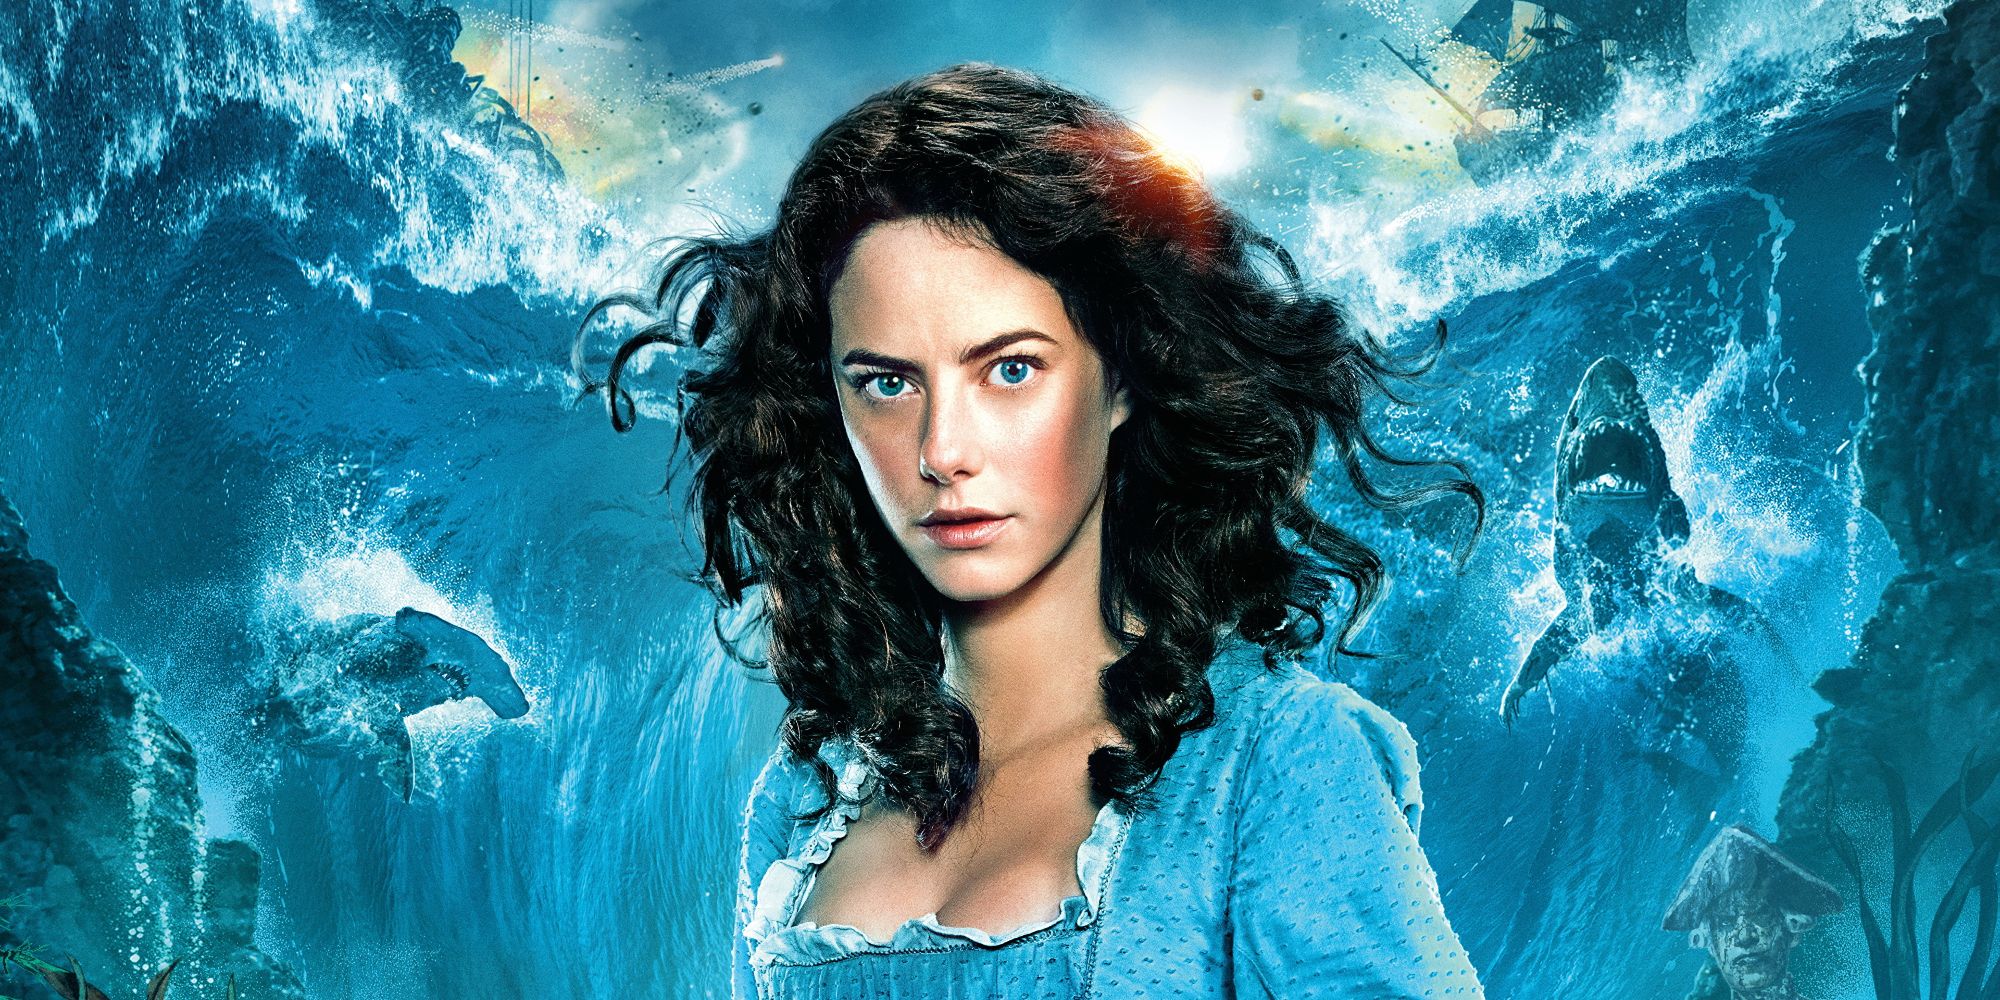 Kaya Scodelario in front of an ocean backdrop in a poster for Pirates of the Caribbean 5.